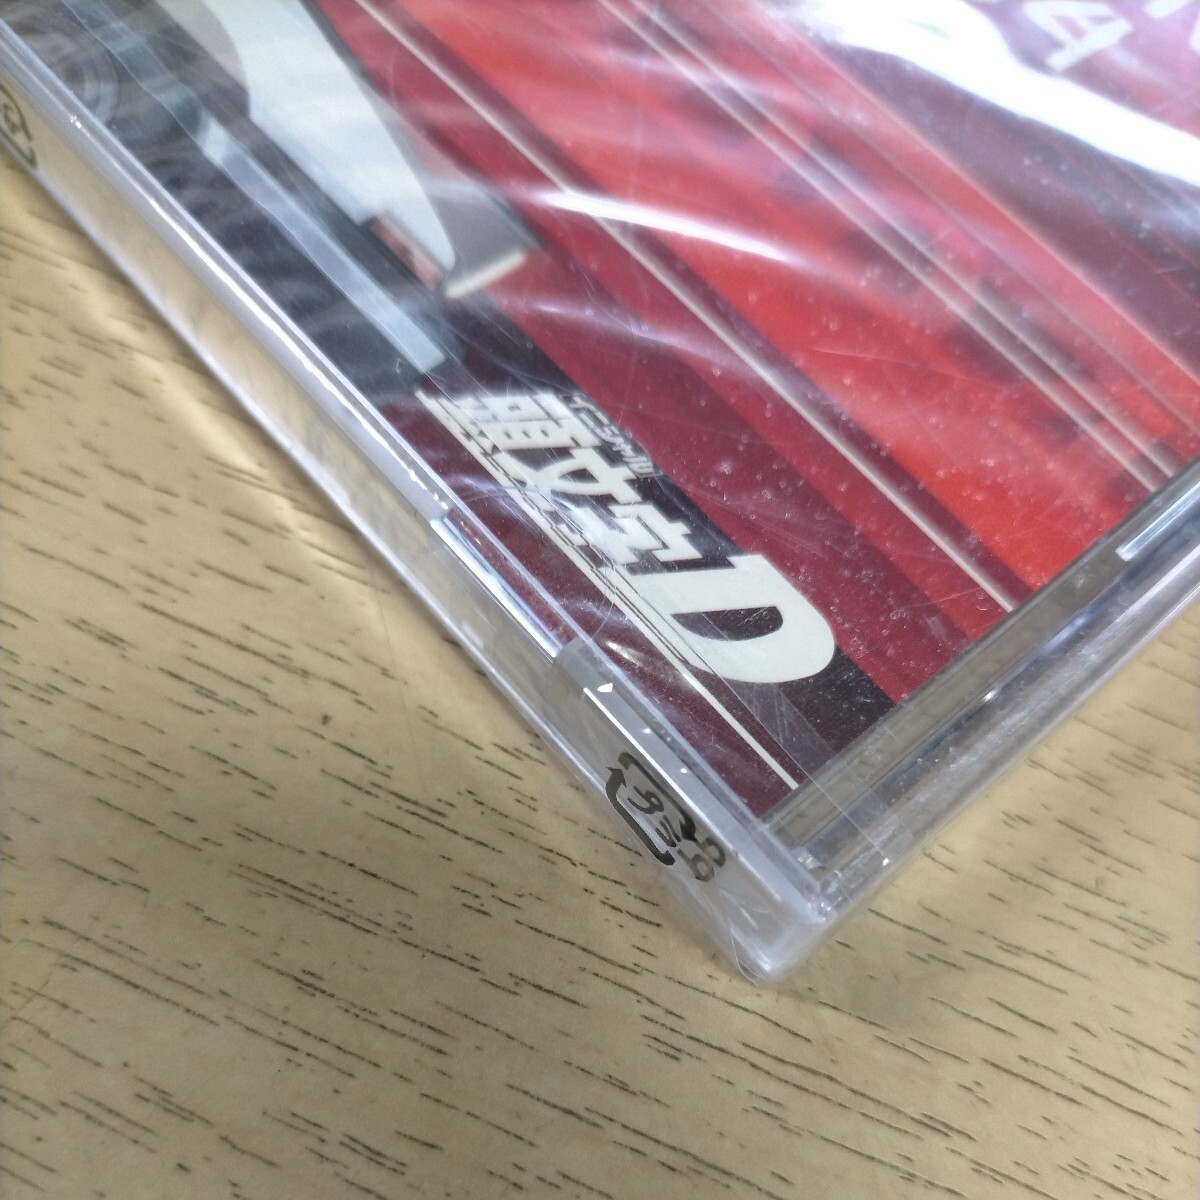 [ unopened ]INITIAL D BEST SONG COLLECTION 1998-2004 initials D initial D 2 sheets set CD* reproduction not yet verification / shrink attrition / no claim .